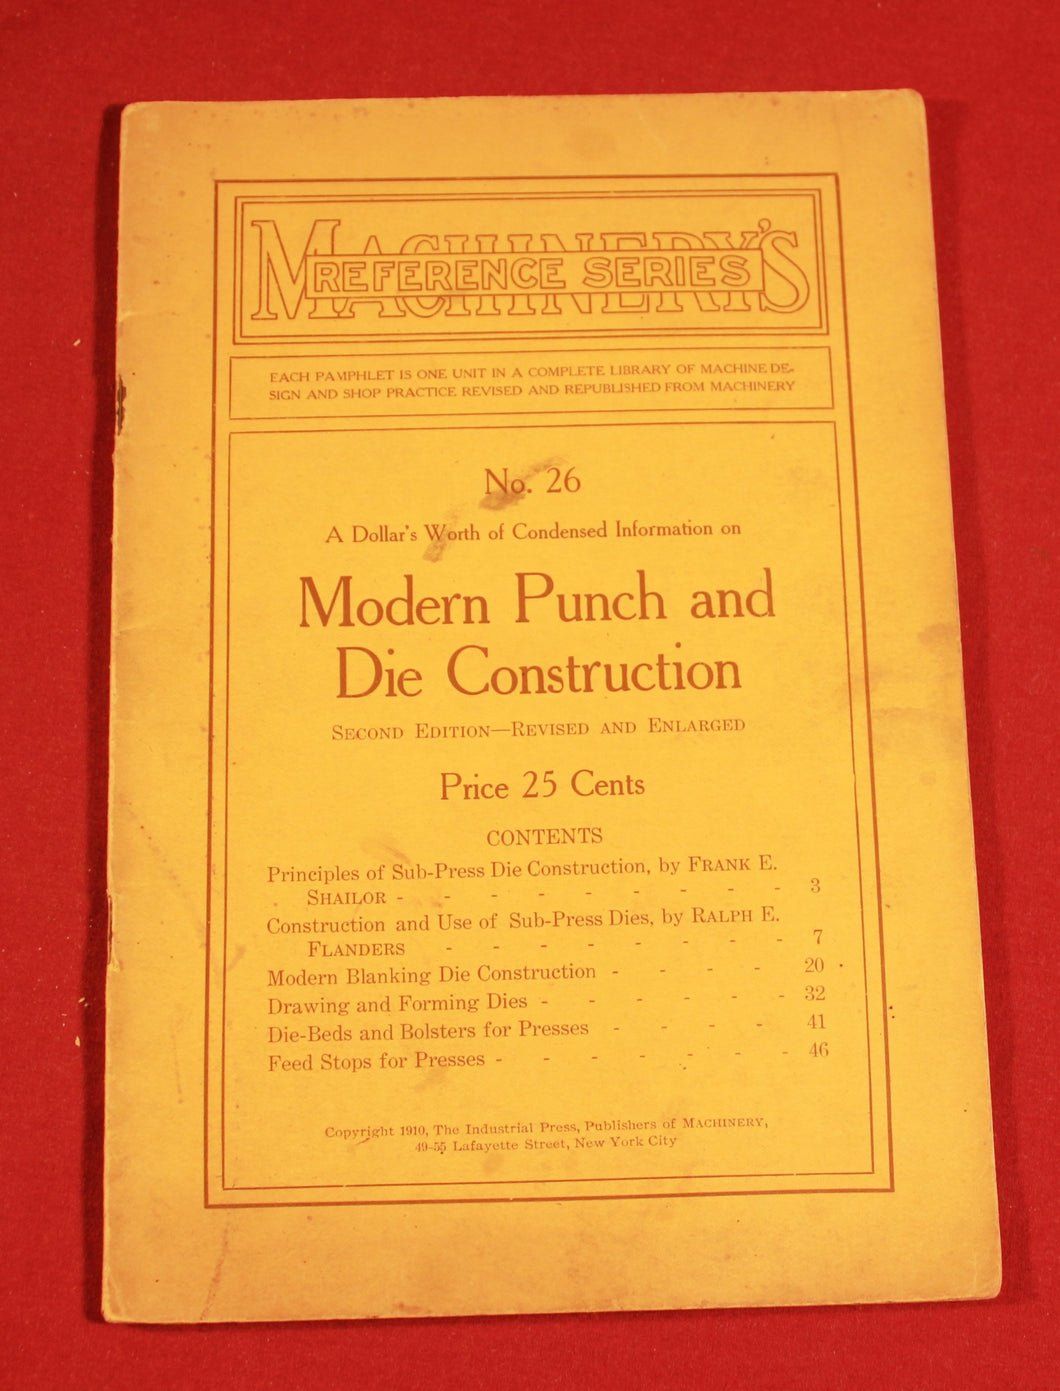 “Machinery's Reference Series” No. 26 MODERN PUNCH and DIE CONSTRUCTION 1910